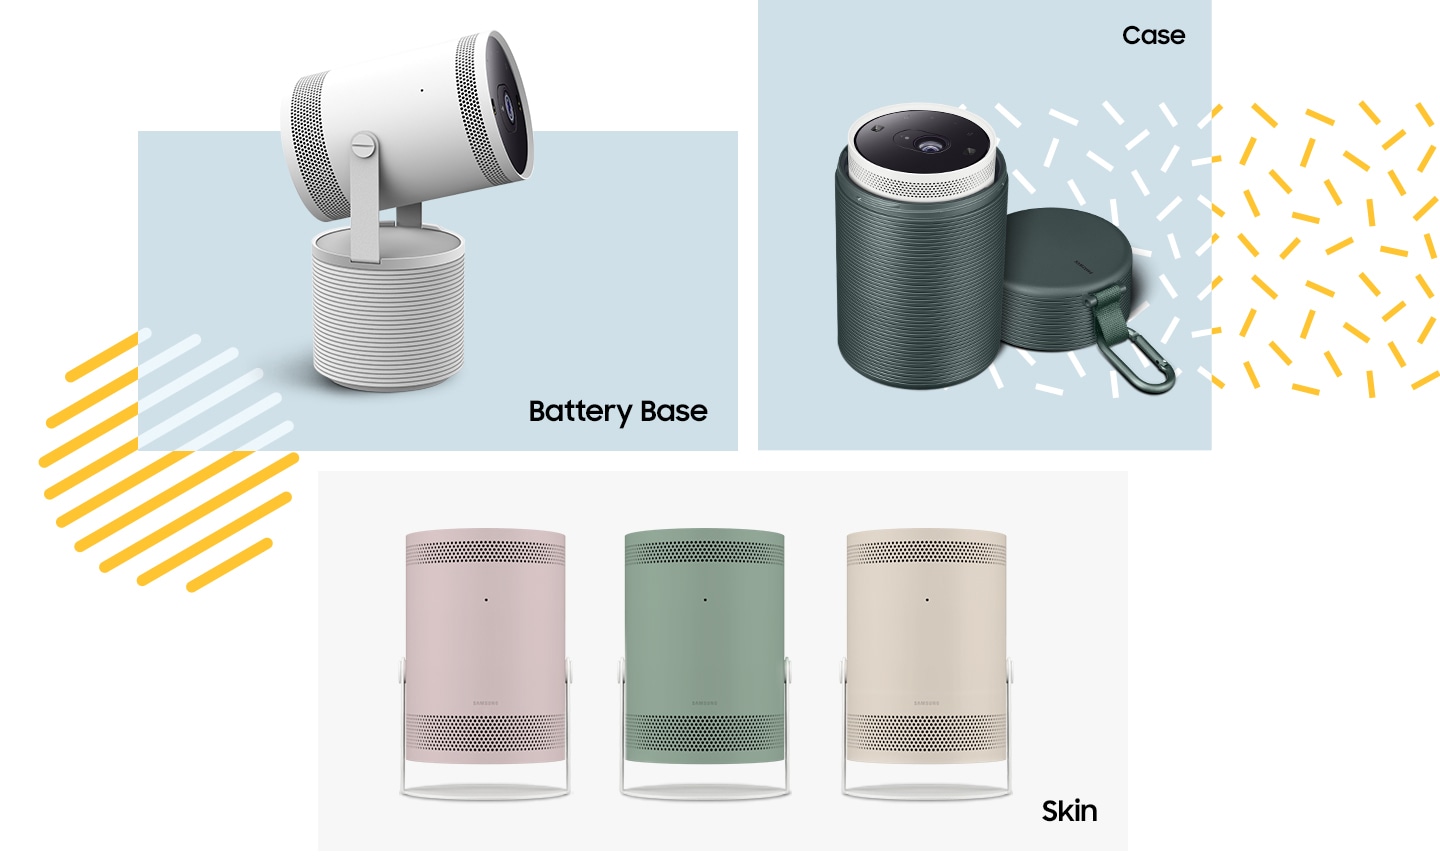 Image displaying the Battery Base, Case and Skin accessories available for The Freestyle.